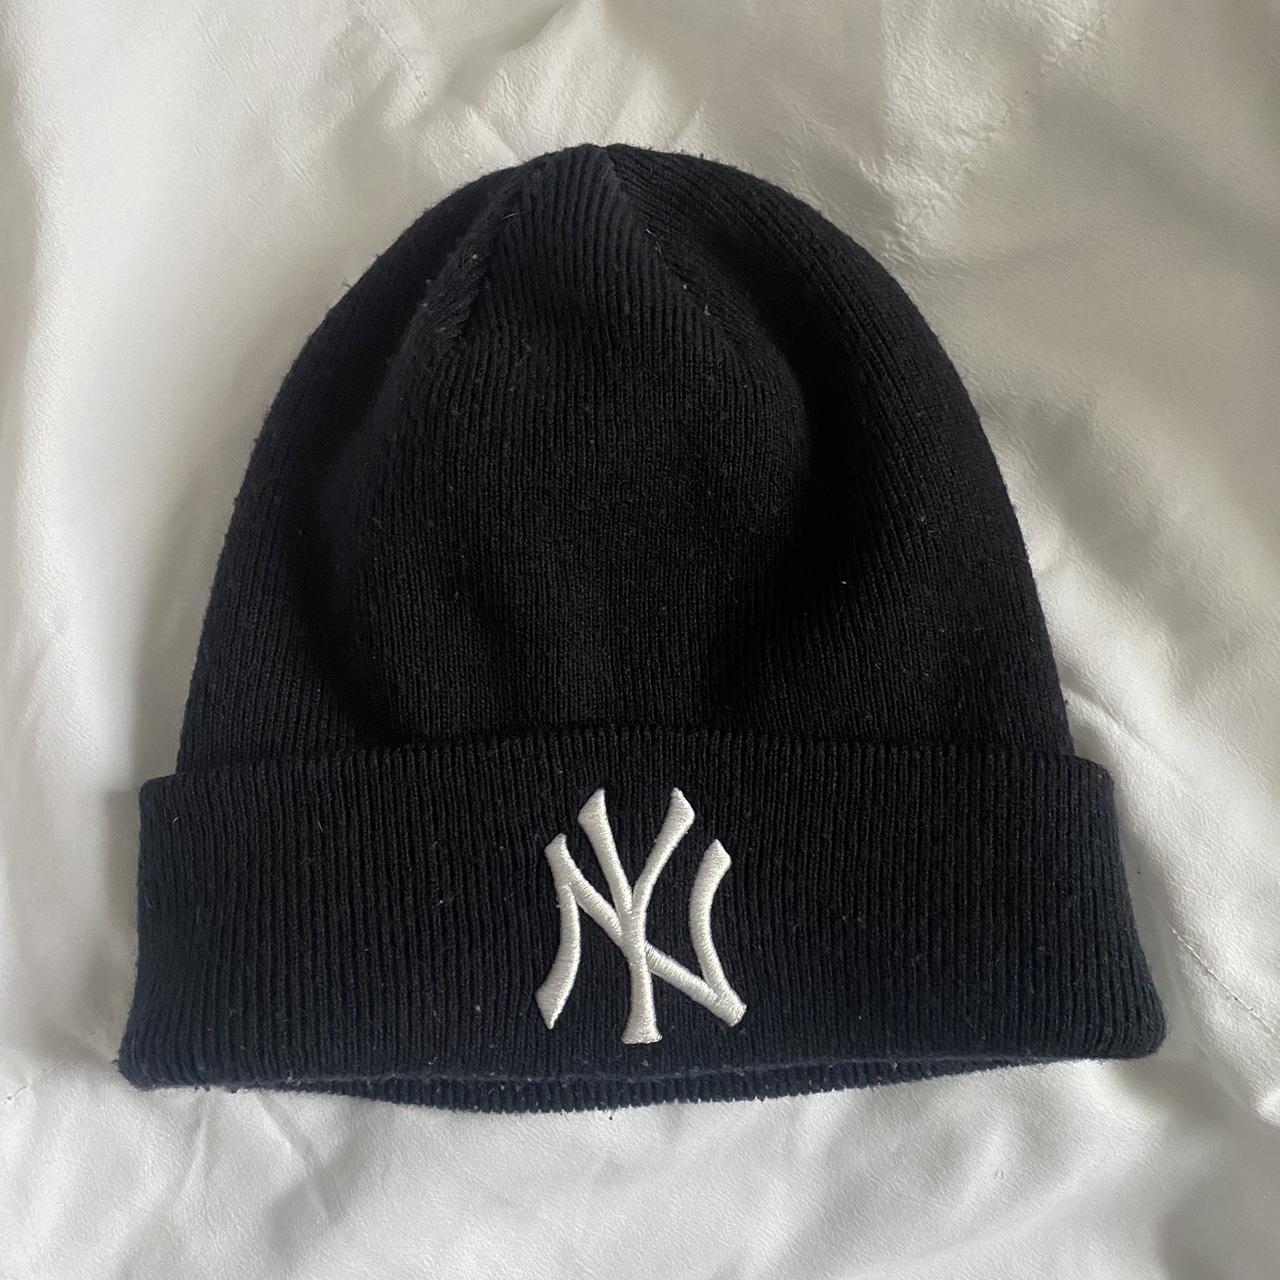 New York Yankees Beanie Older style bought from... - Depop